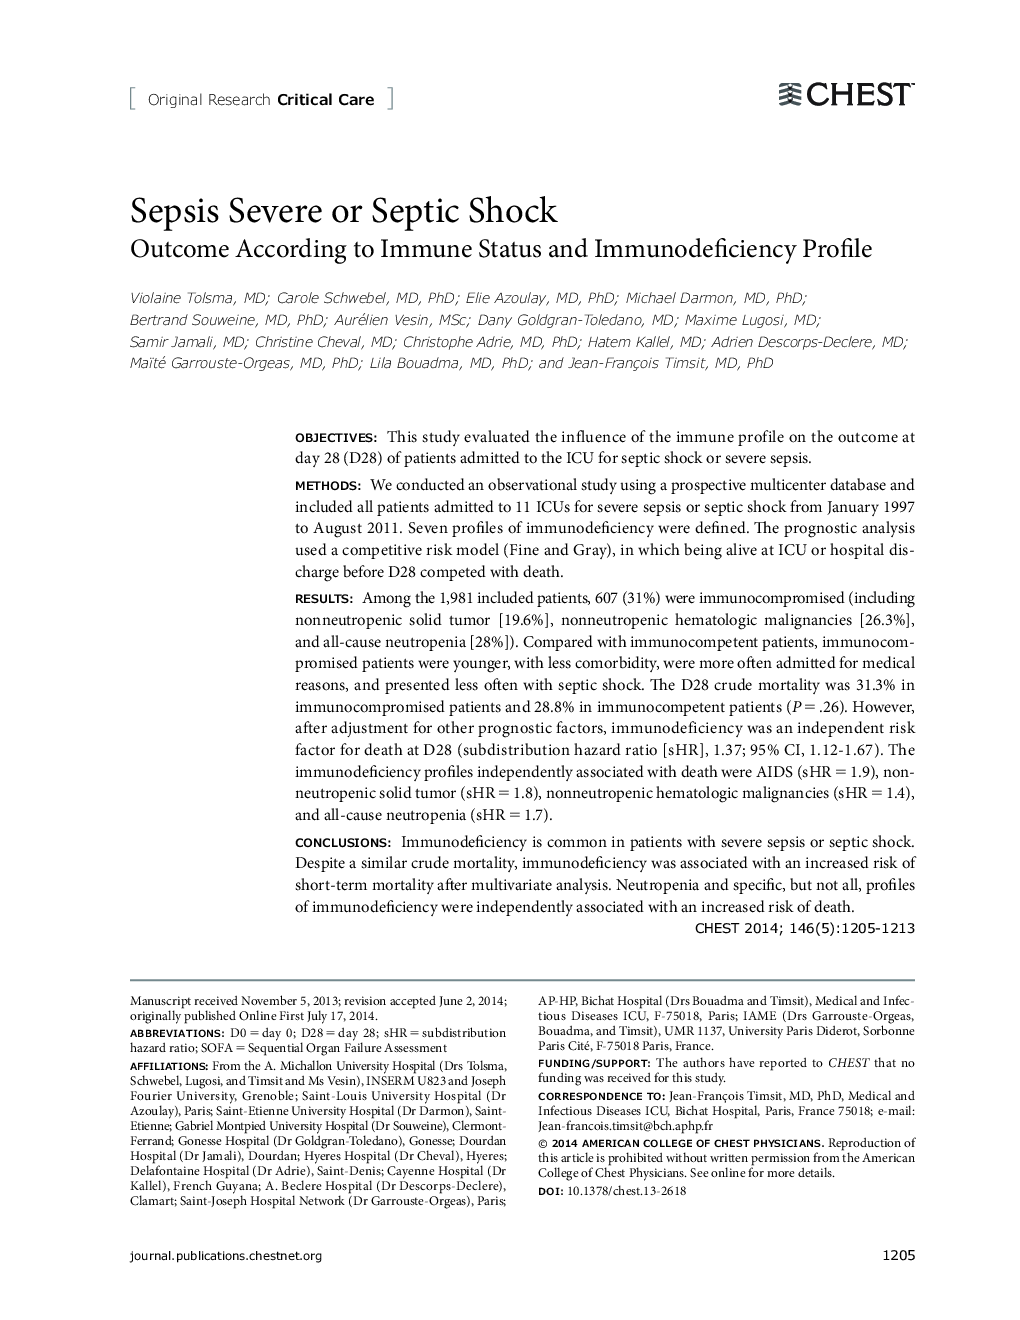 Sepsis Severe or Septic Shock